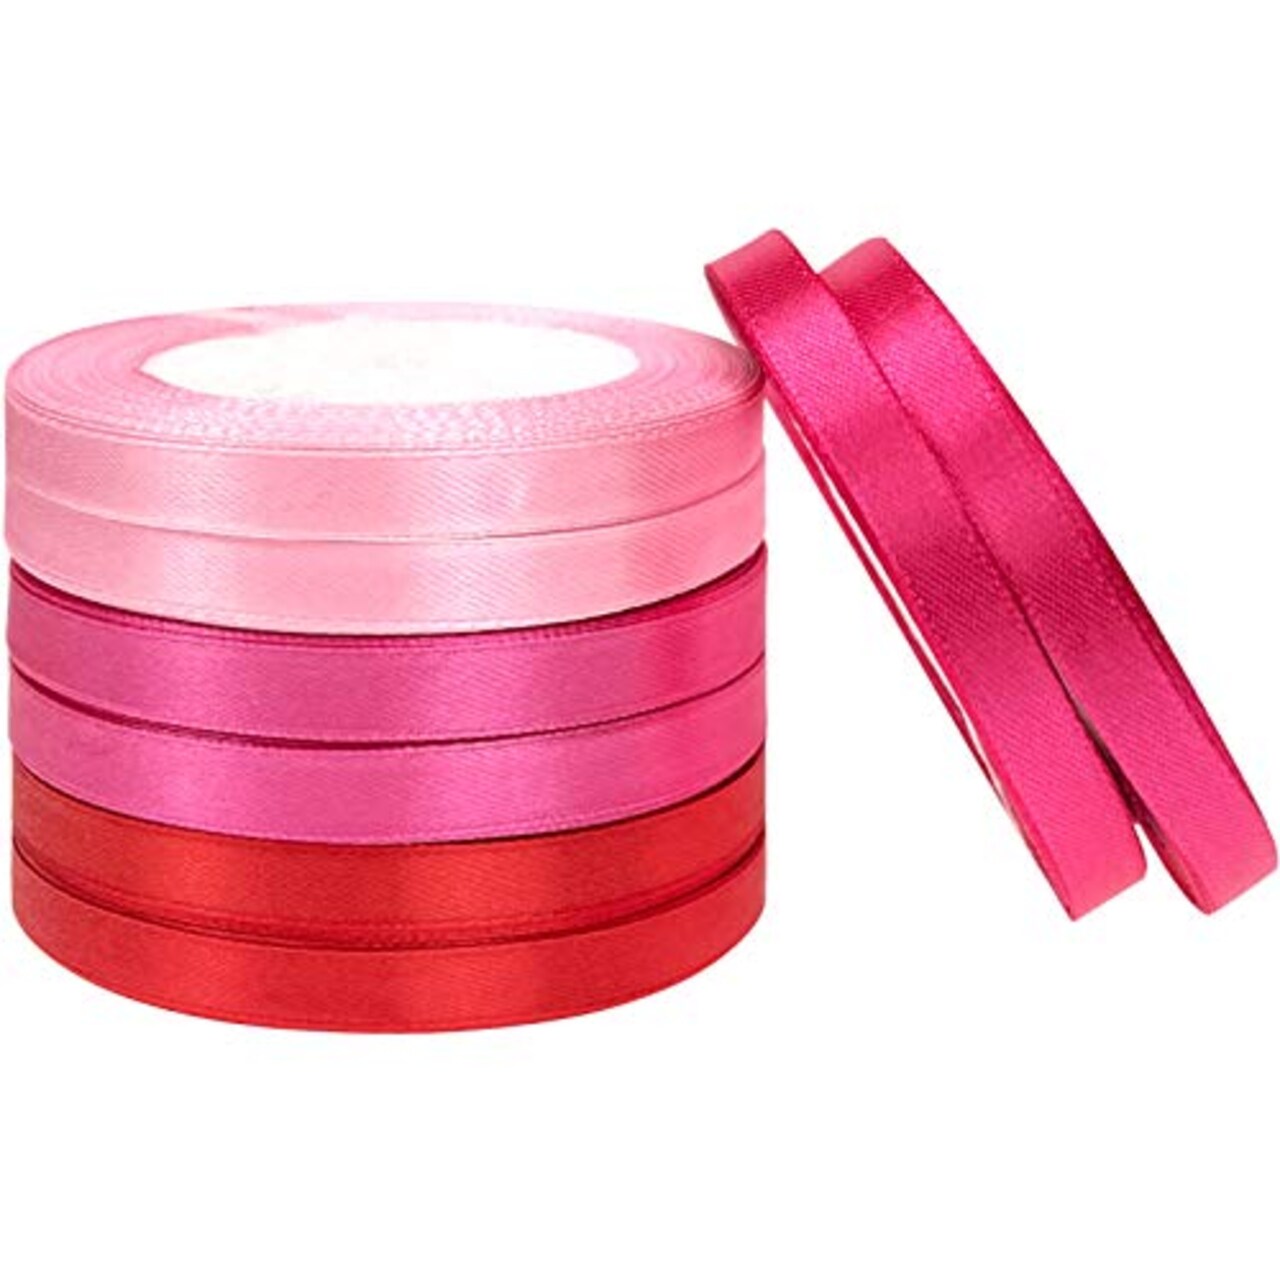 Llxieym Valentine's Day Satin Ribbon Gift Wrapping Ribbon for